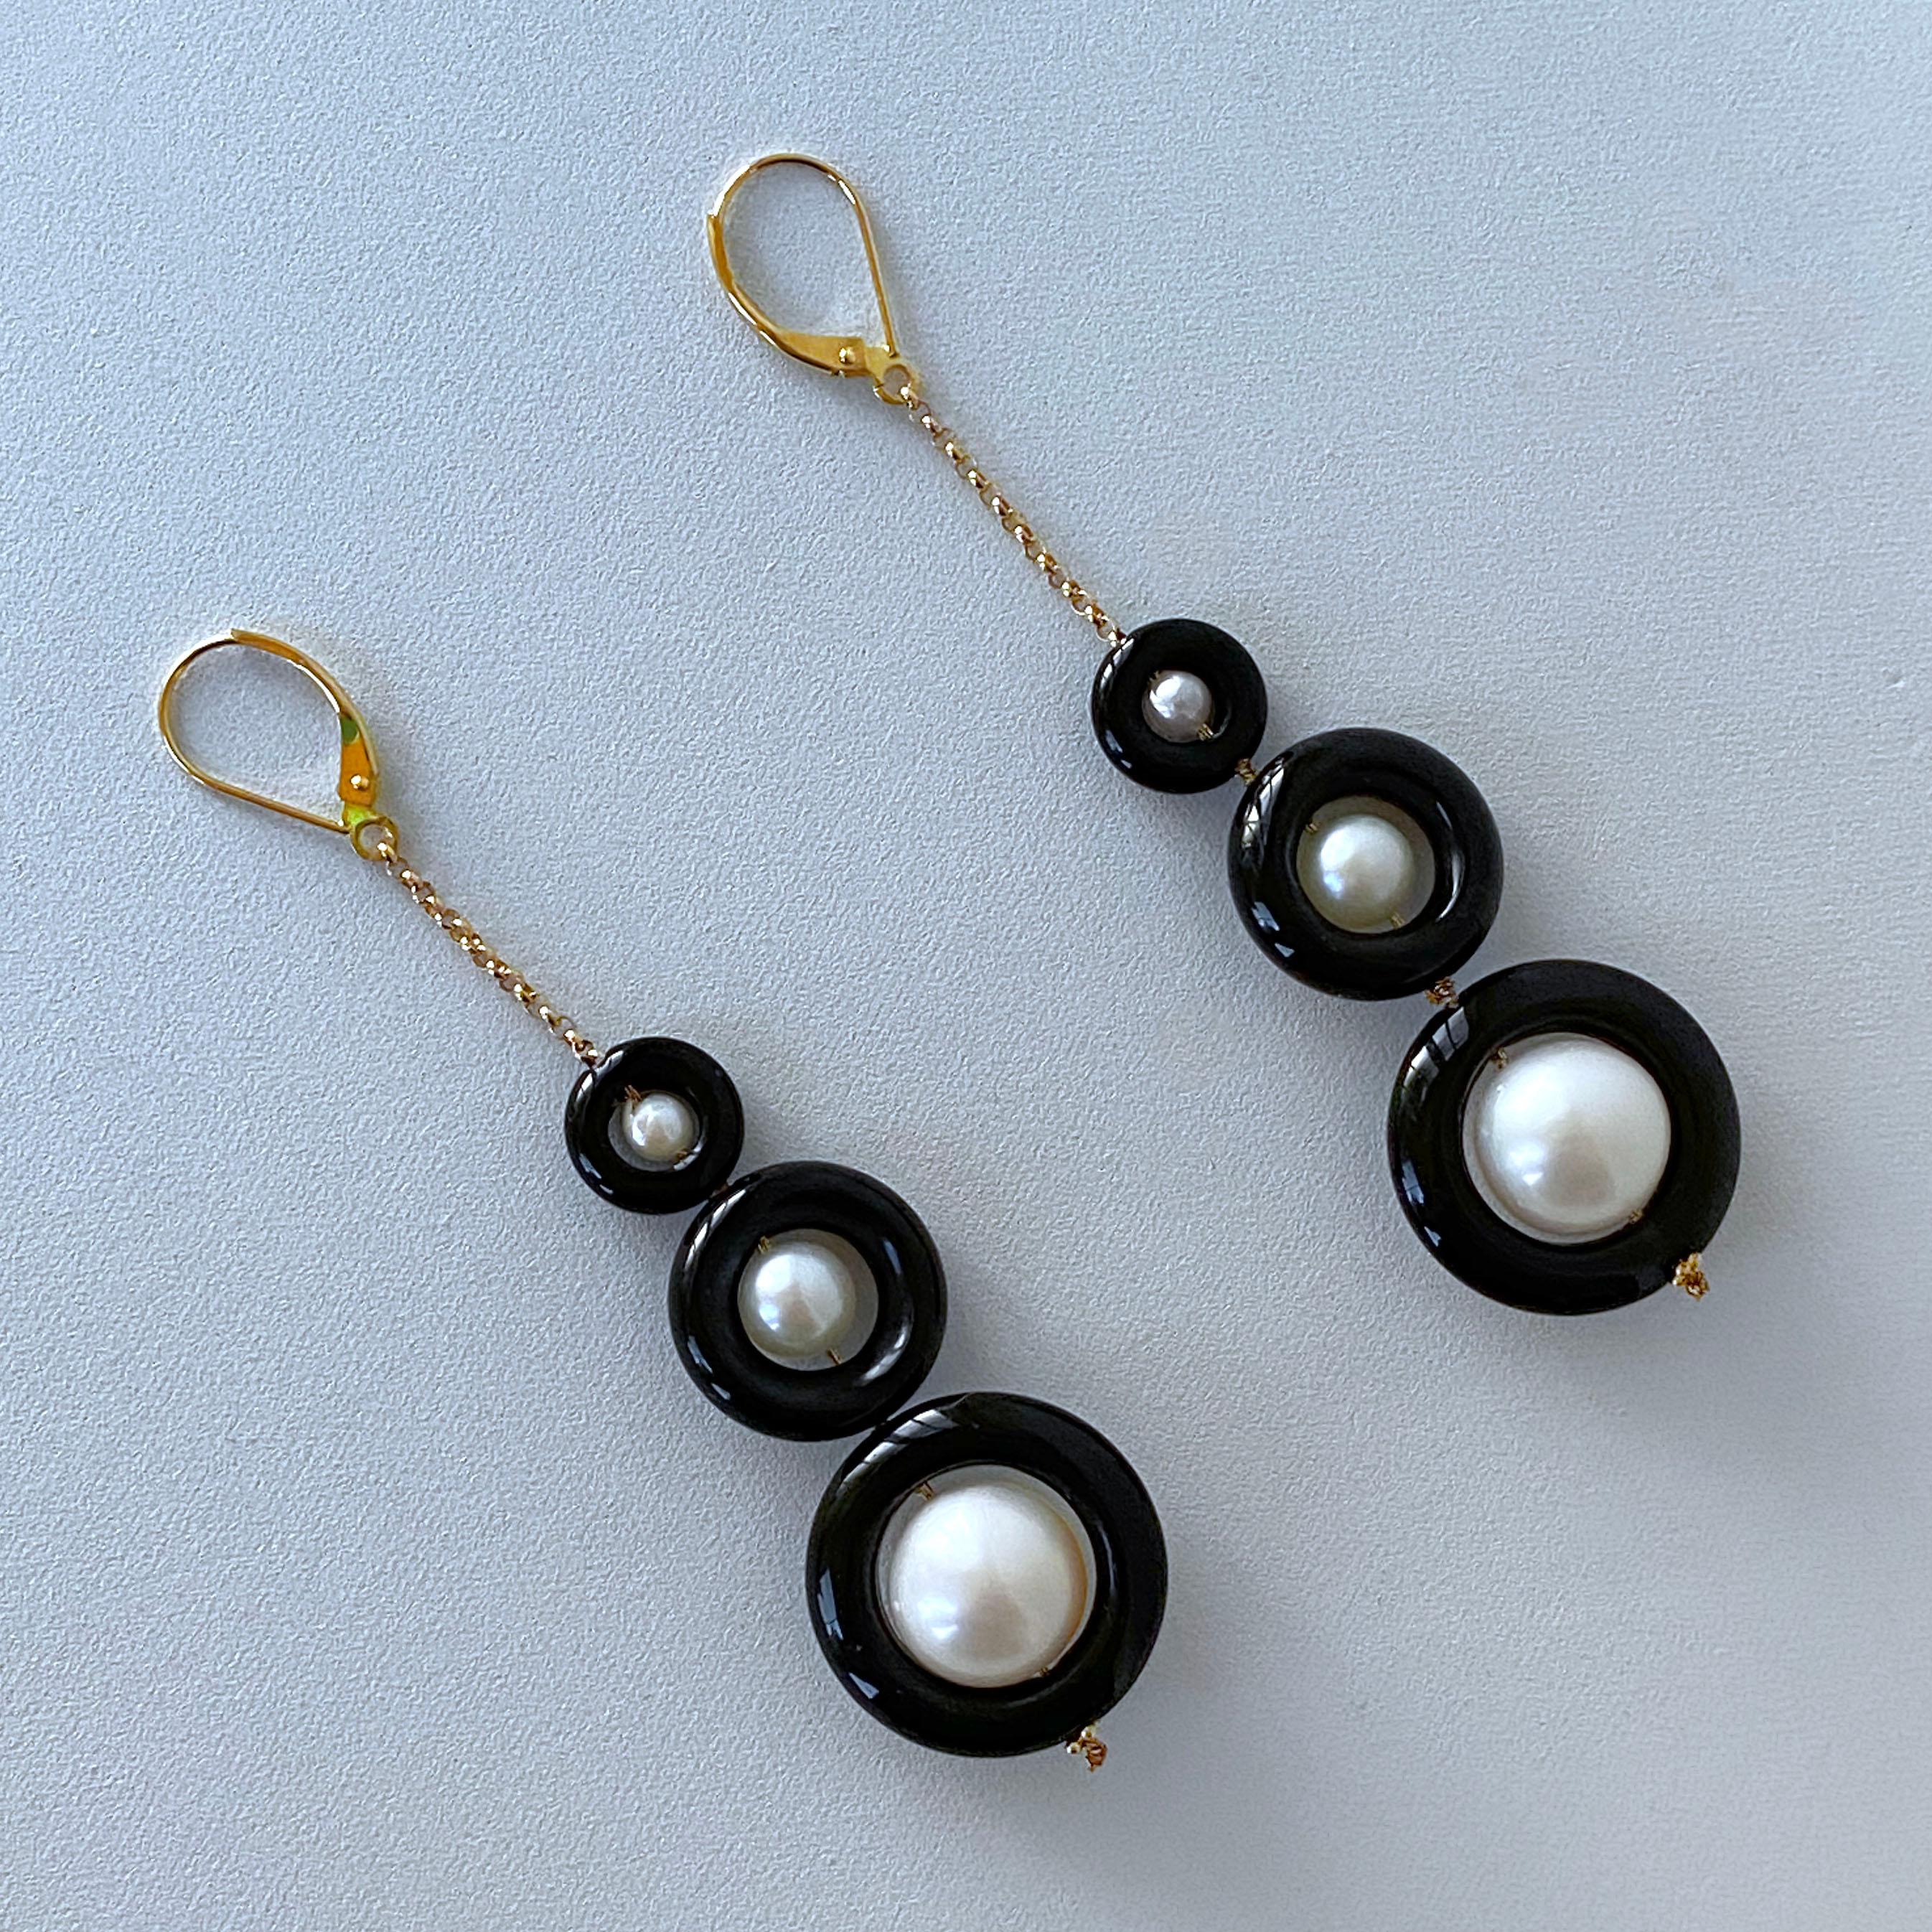 Artisan Marina J. 3 Tier Pearl, Black Onyx & Solid 14k Yellow Gold Graduated Earrings For Sale